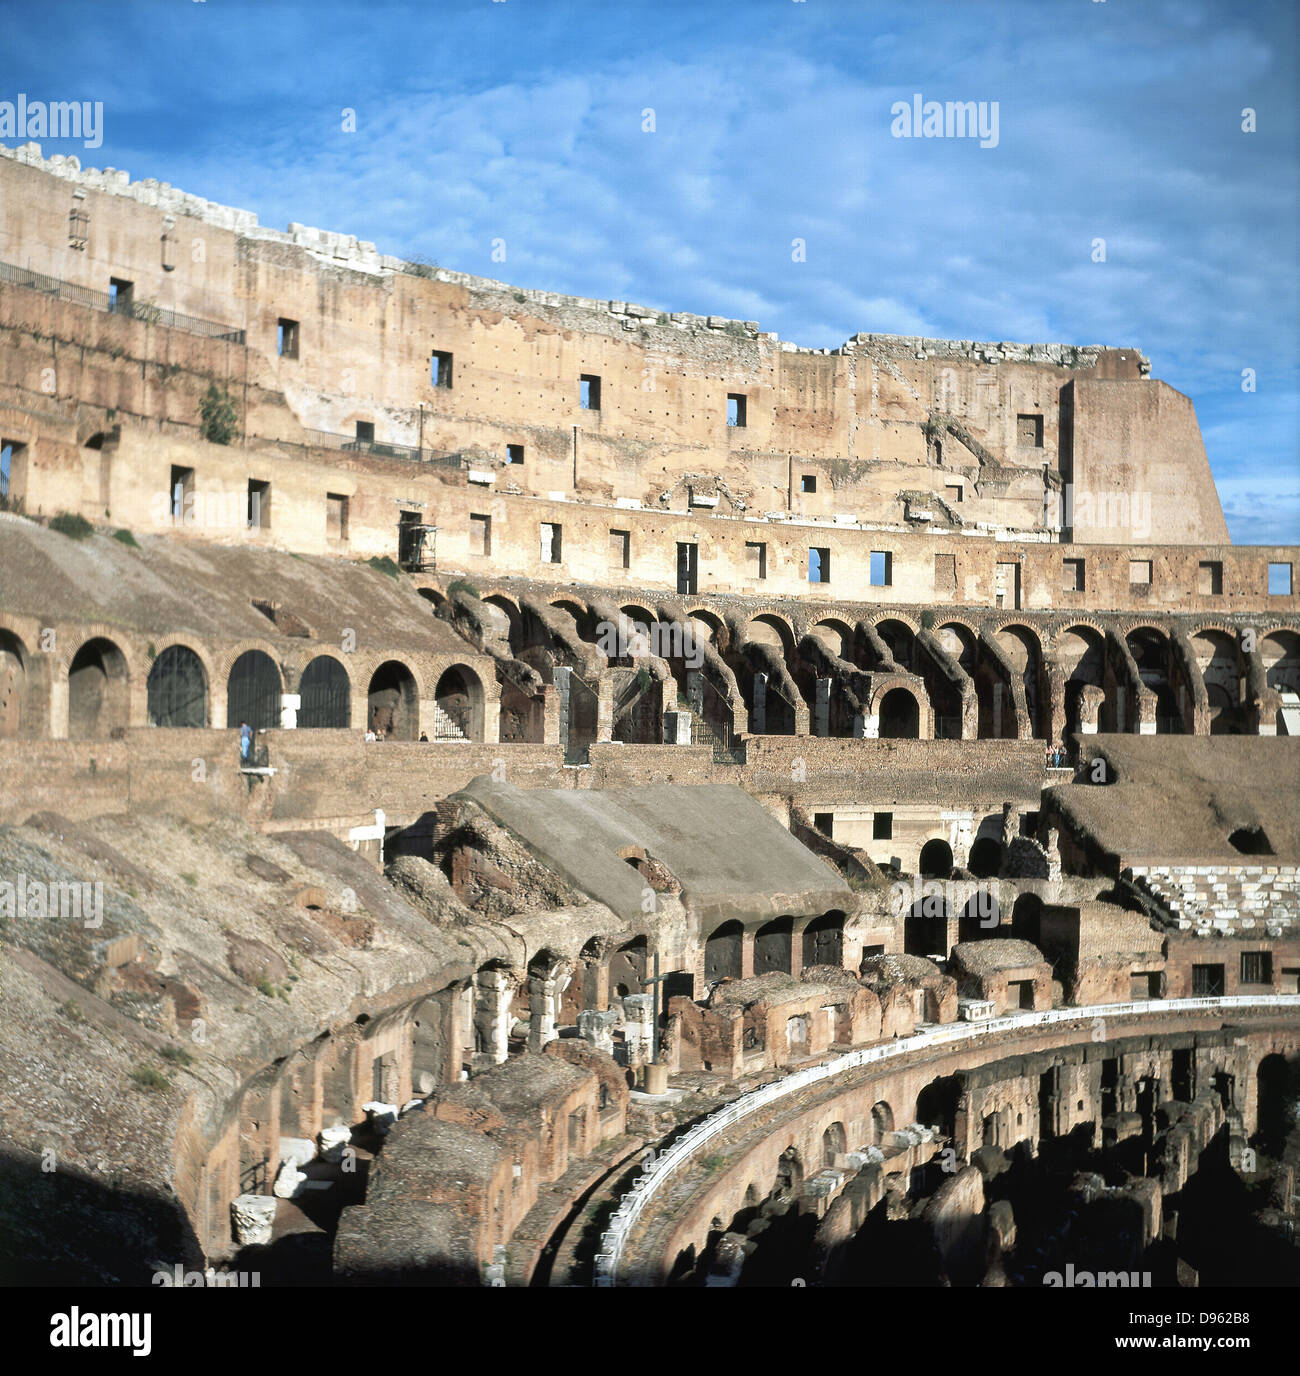 Colosseum, Rome, showing side elevation and upper tiers. Ancient Roman amphitheatre. Photograph. Stock Photo